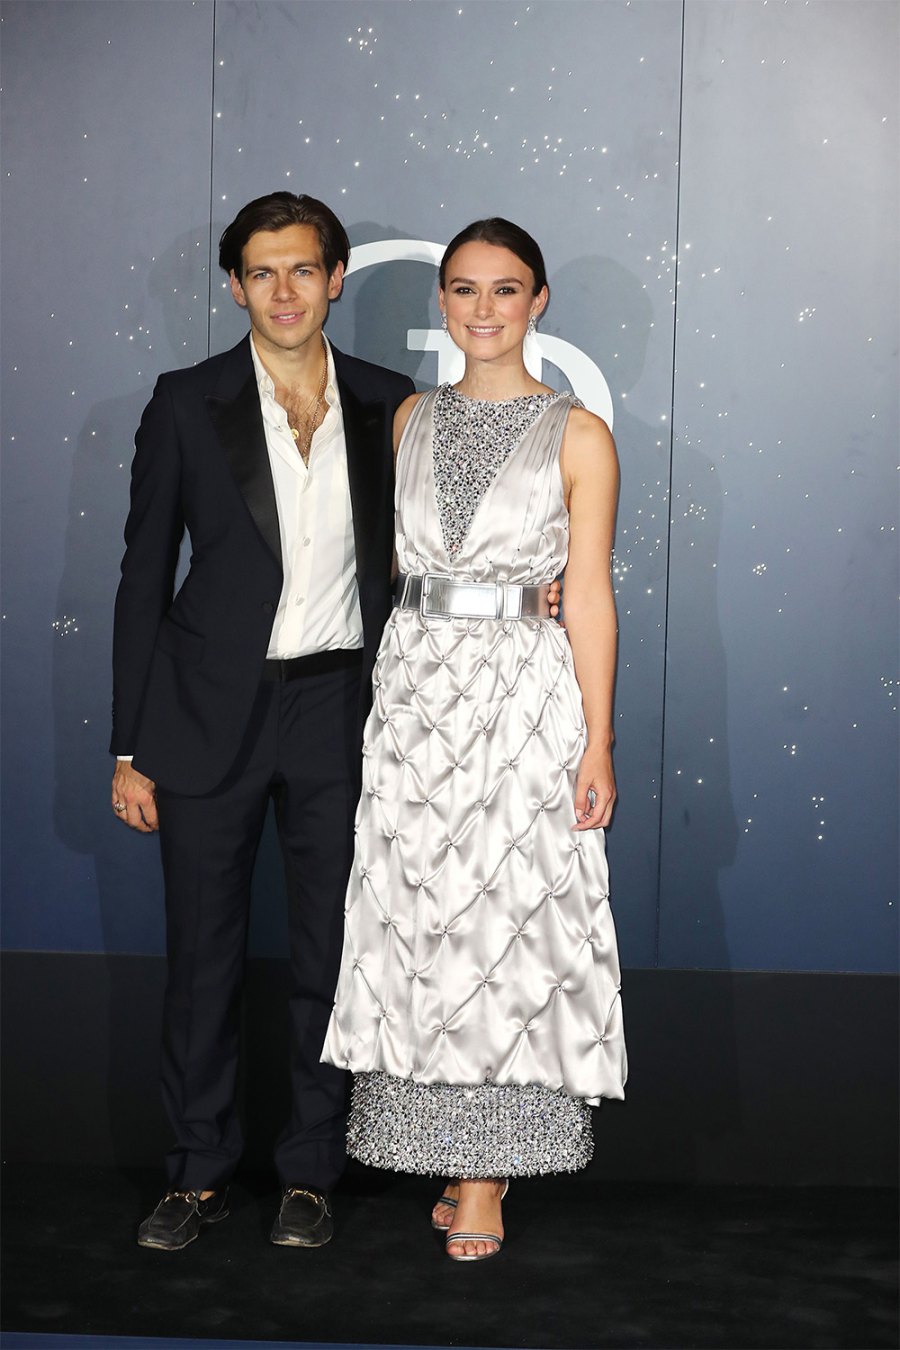 Keira Knightley and Husband James Righton's Relationship Timeline